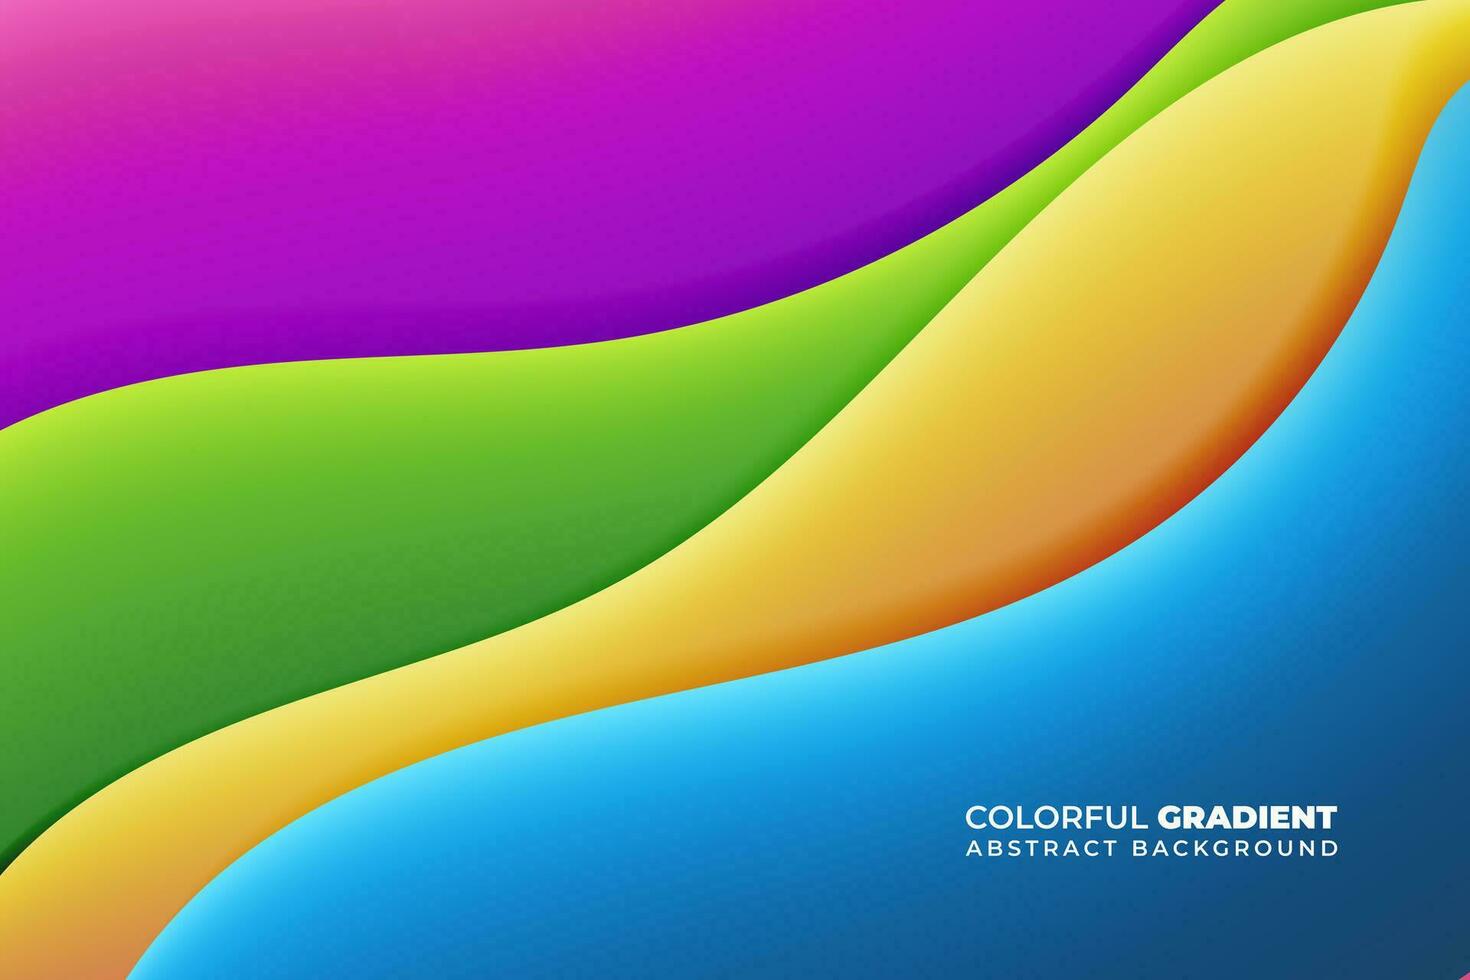 3D Wavy Background. Colorful Dynamic Effect. Abstract Vector Illustration. Design Template Wallpaper.